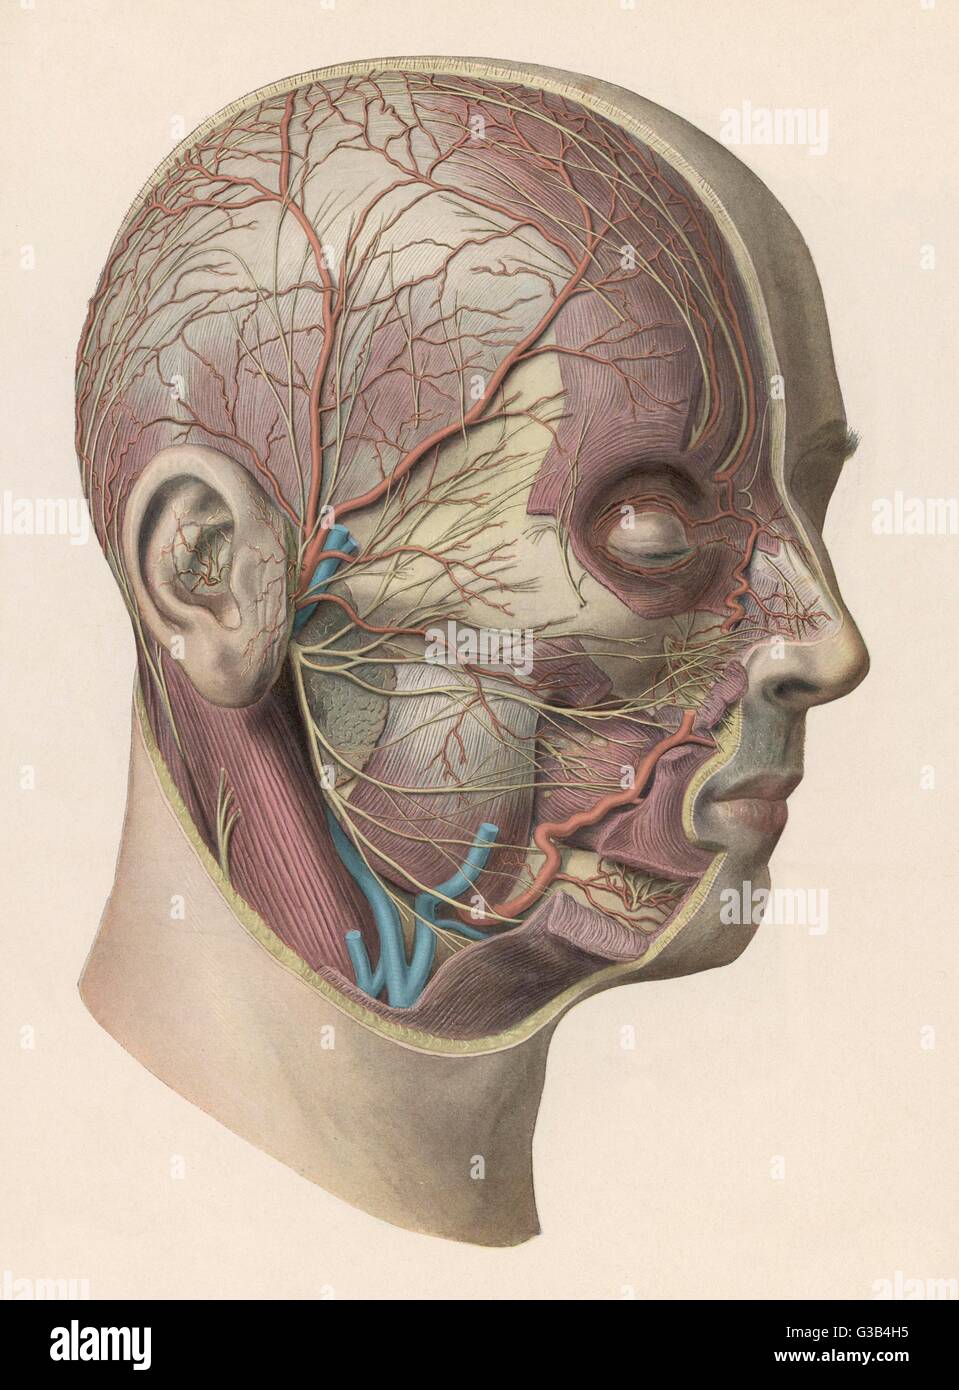 Detailed diagram showing  muscles and veins inside of  the head        Date: circa 1900 Stock Photo